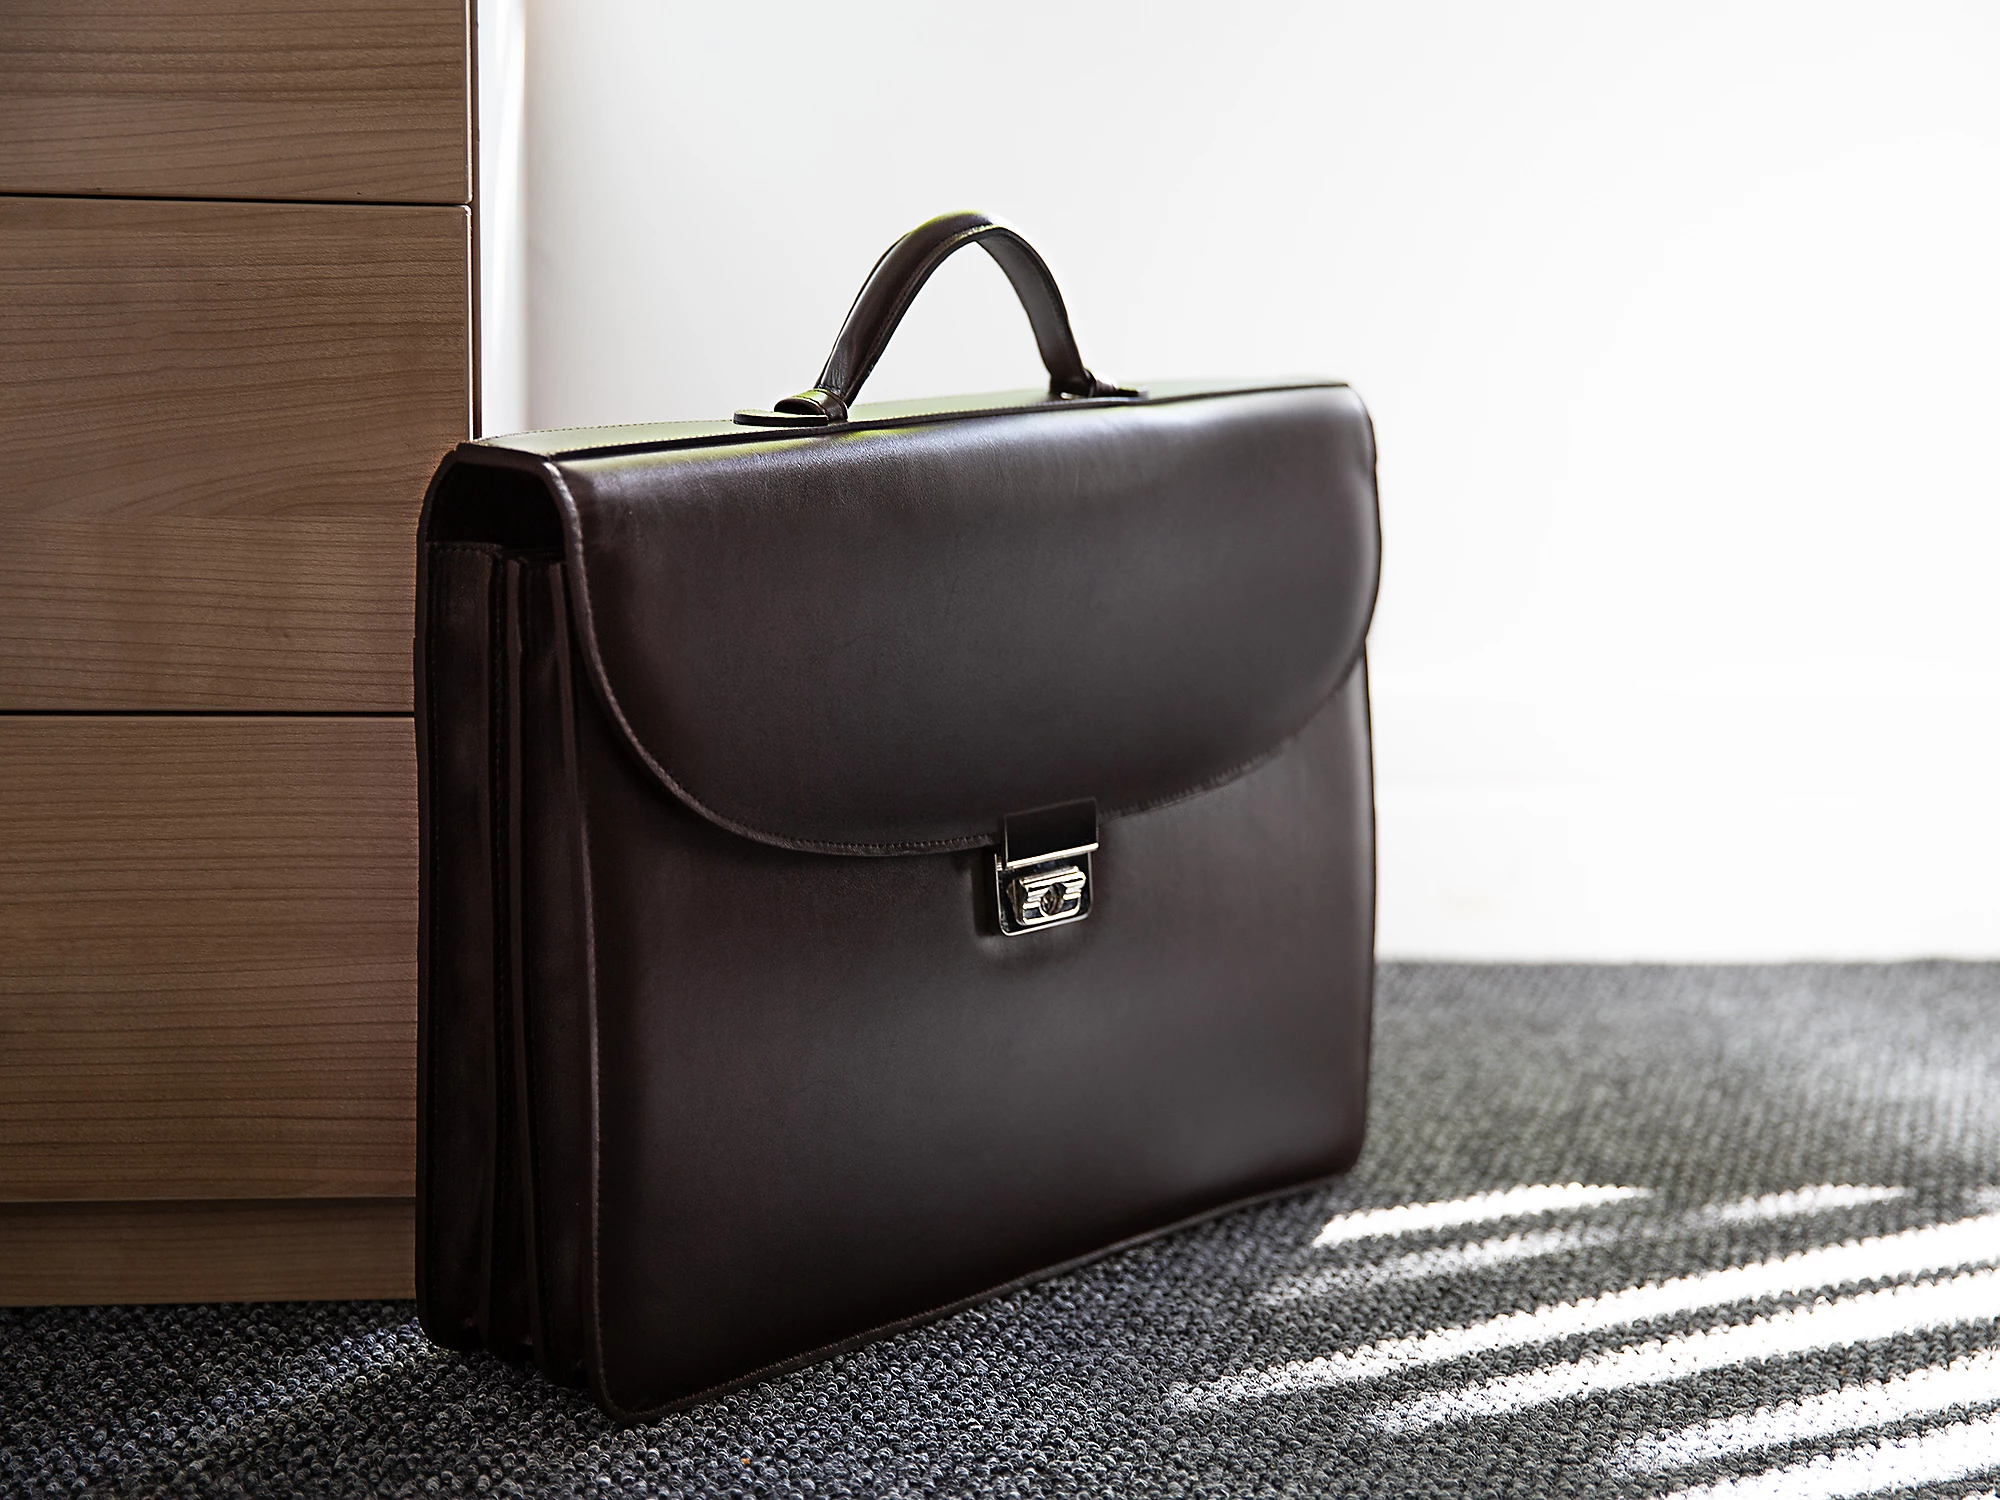 Triple Gusset Briefcase - Navy Blue - Smooth Leather